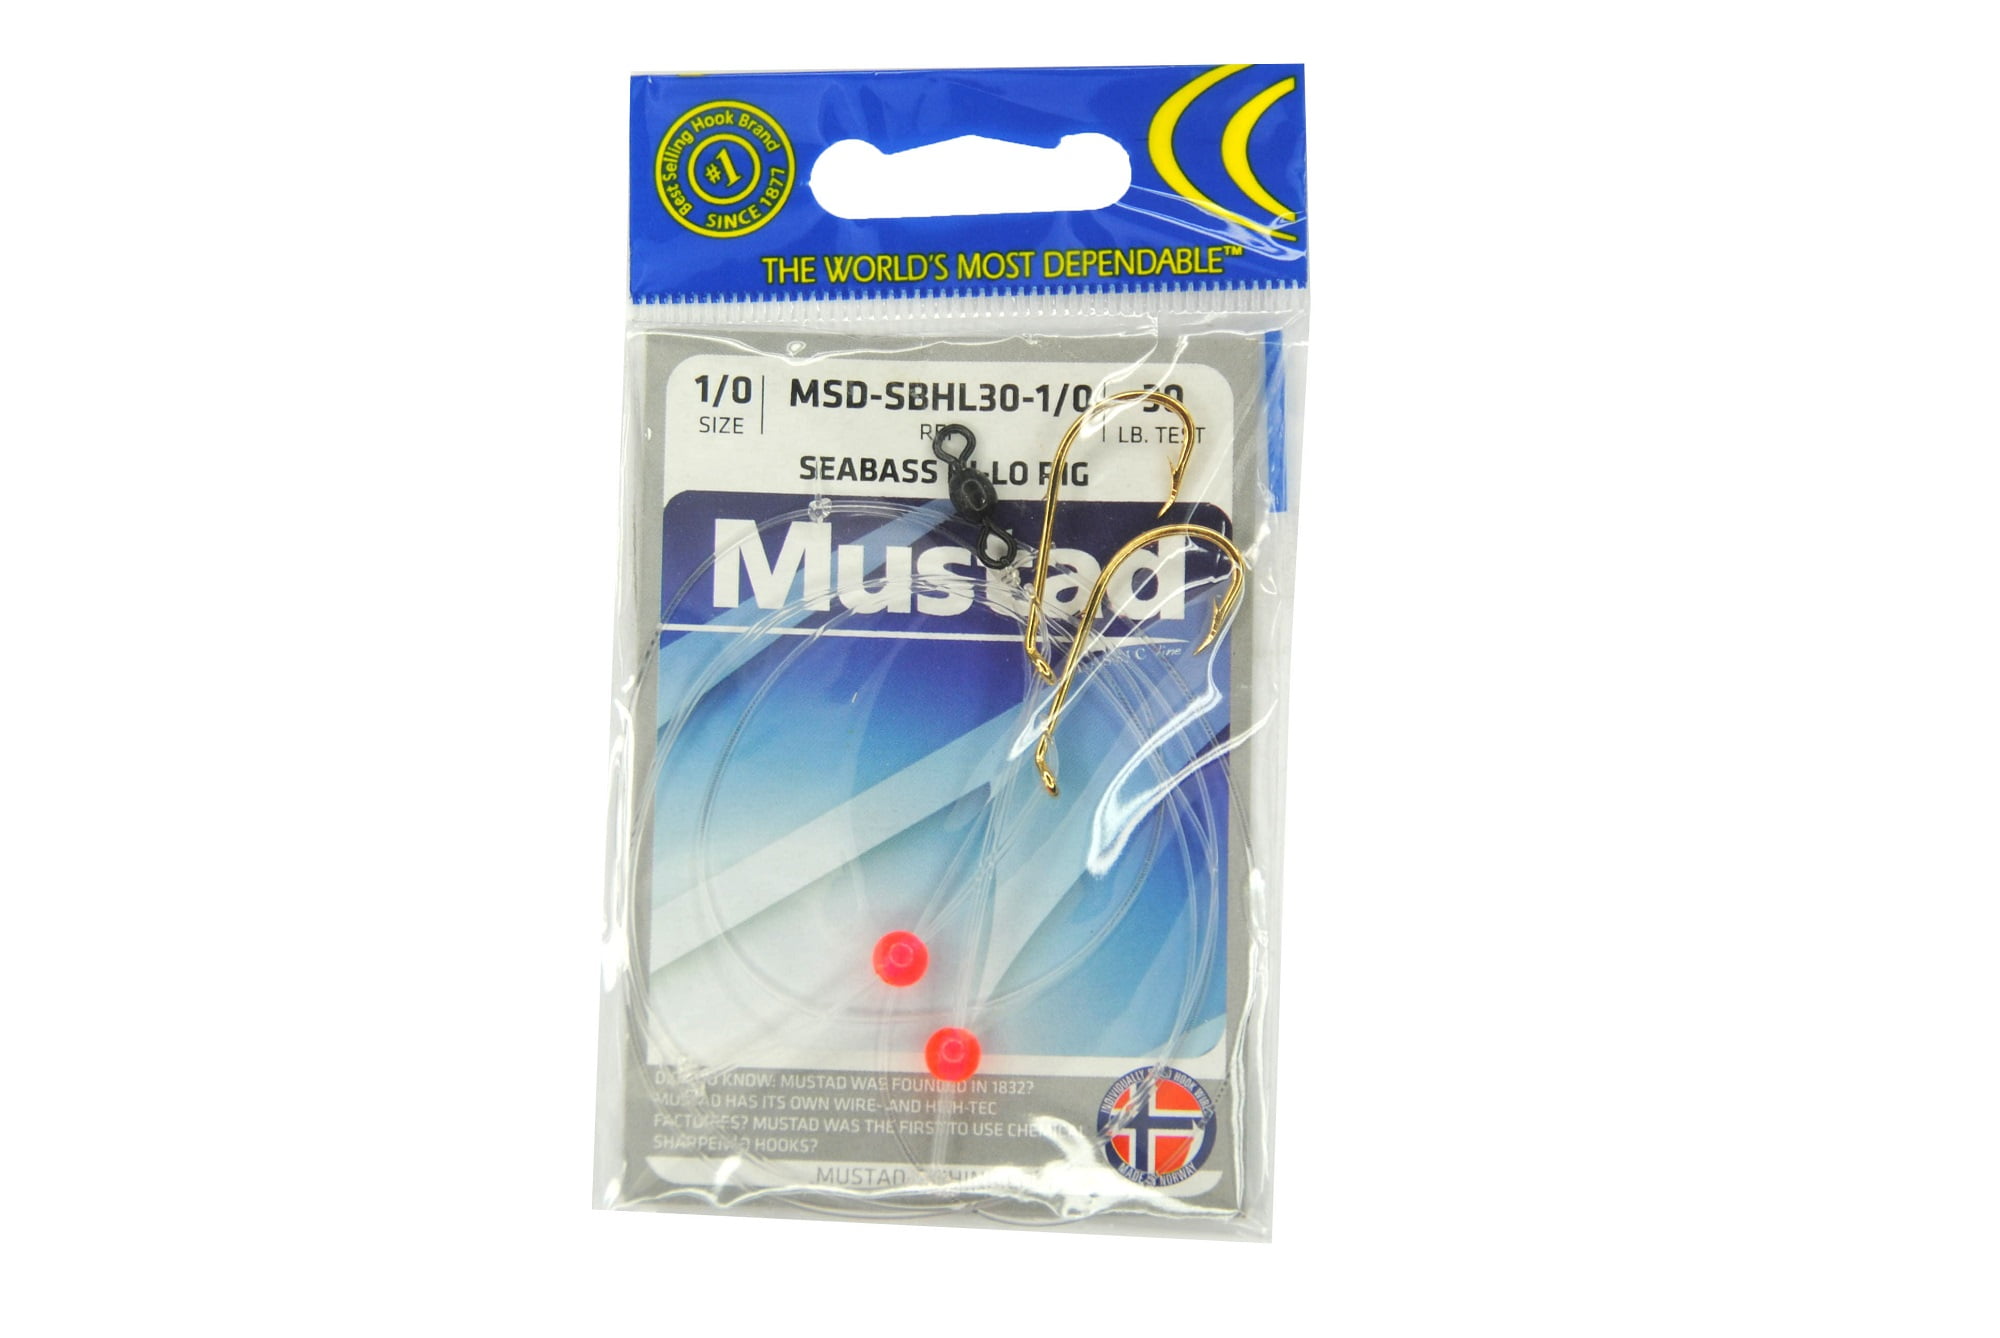 Mustad UltraPoint 10814NP Hoodlum 5X Strong Live Bait Hook - 6 per Pack, Size: 8/0, Black